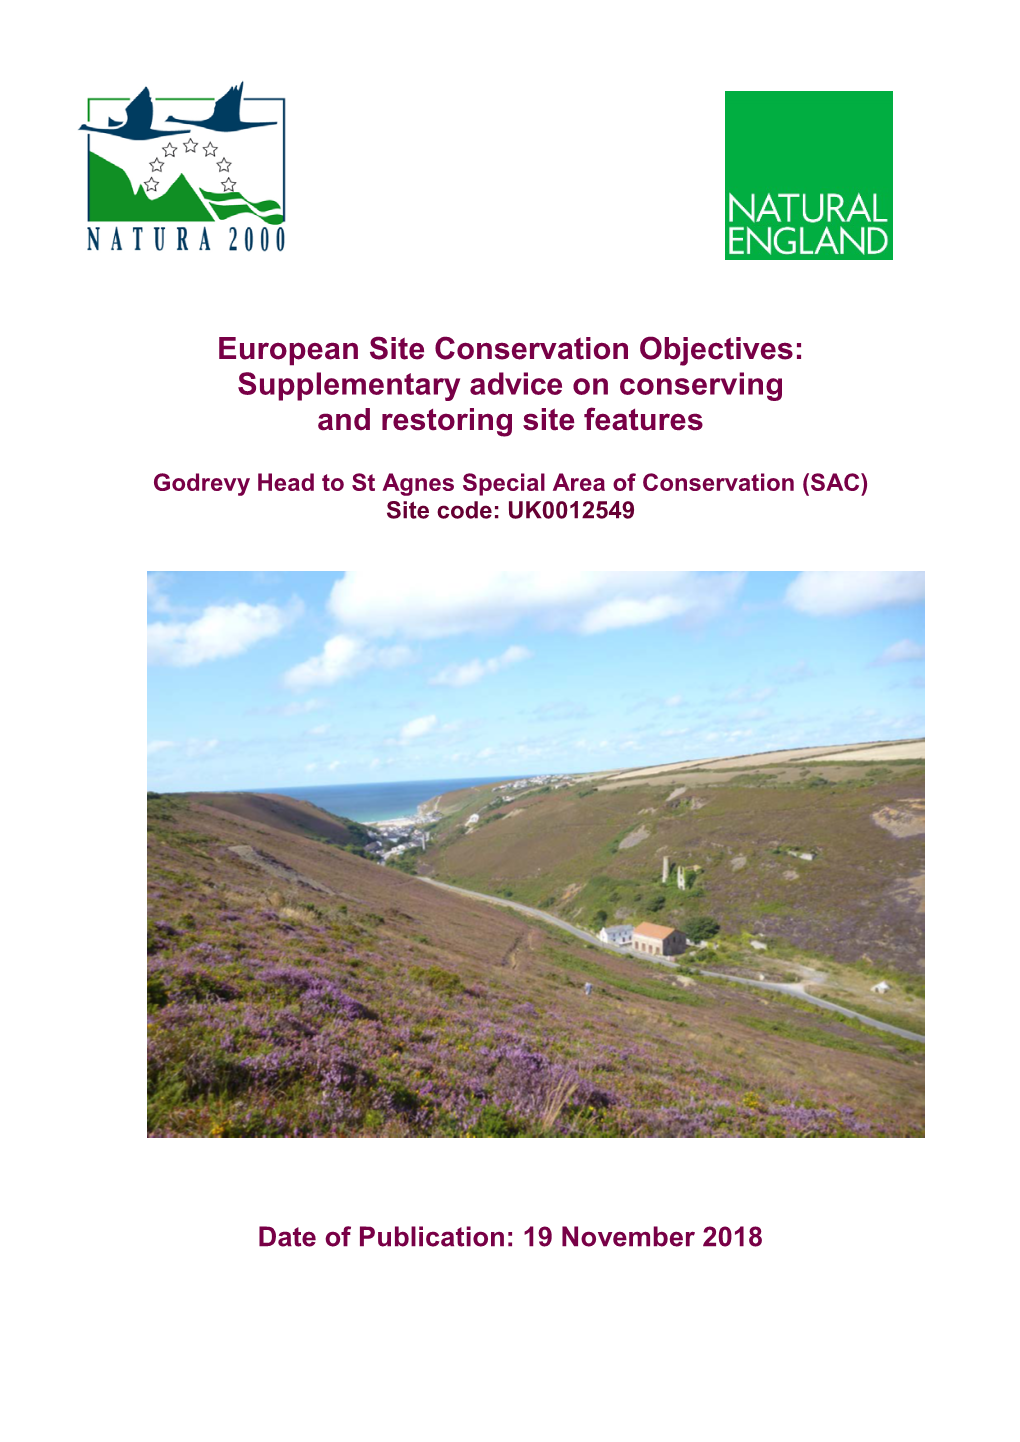 Godrevy Head to St Agnes SAC Conservation Objectives Supplementary Advice